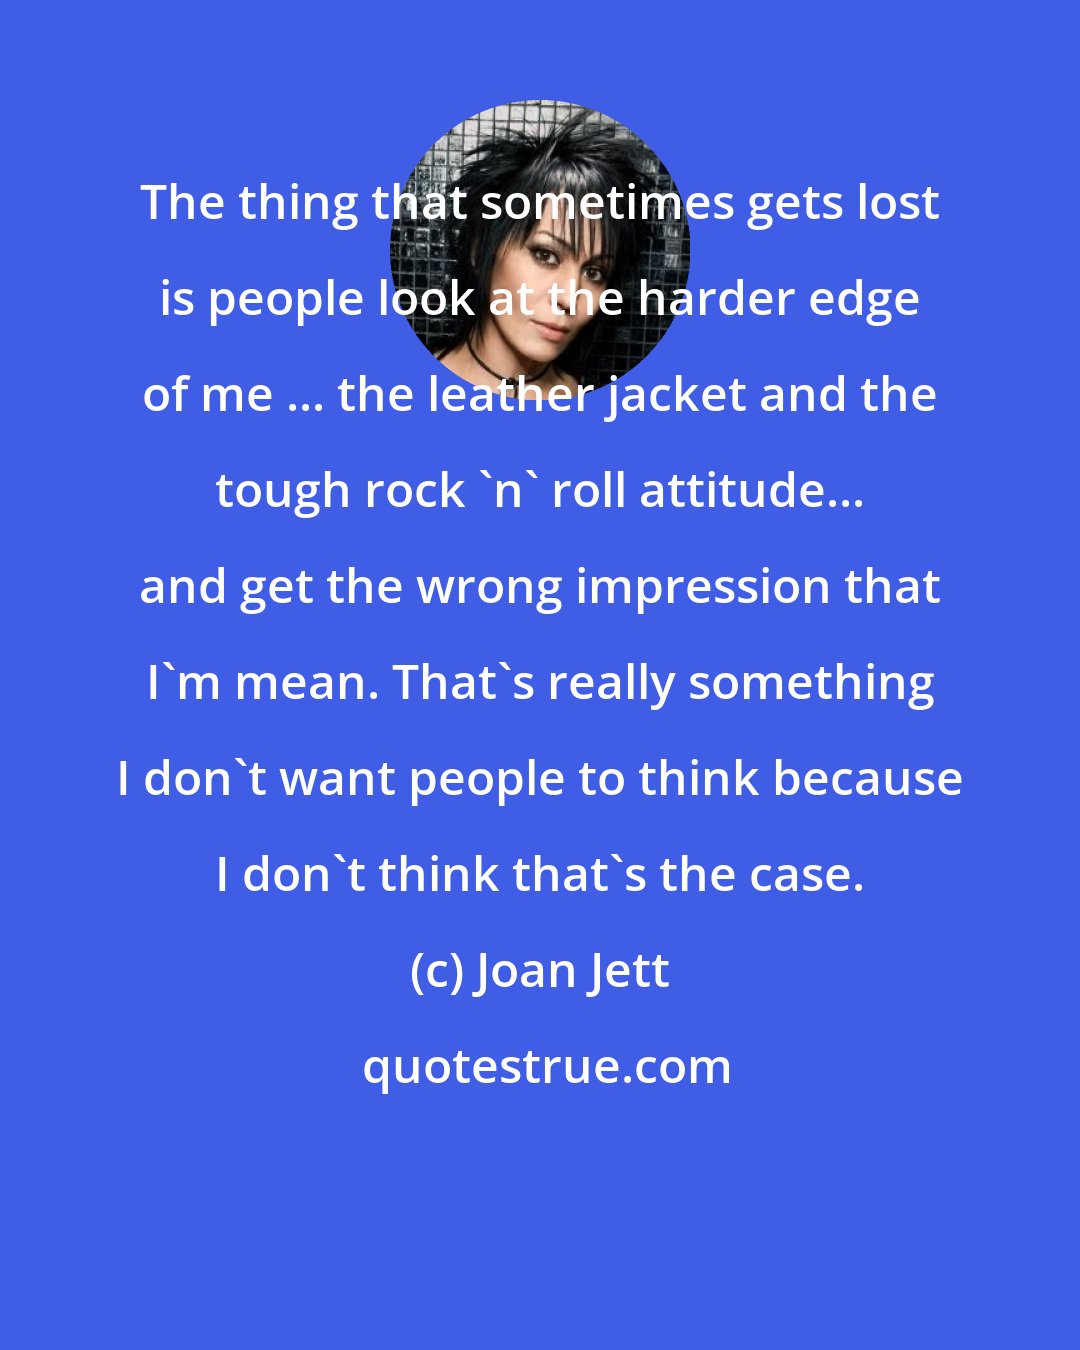 Joan Jett: The thing that sometimes gets lost is people look at the harder edge of me ... the leather jacket and the tough rock 'n' roll attitude... and get the wrong impression that I'm mean. That's really something I don't want people to think because I don't think that's the case.